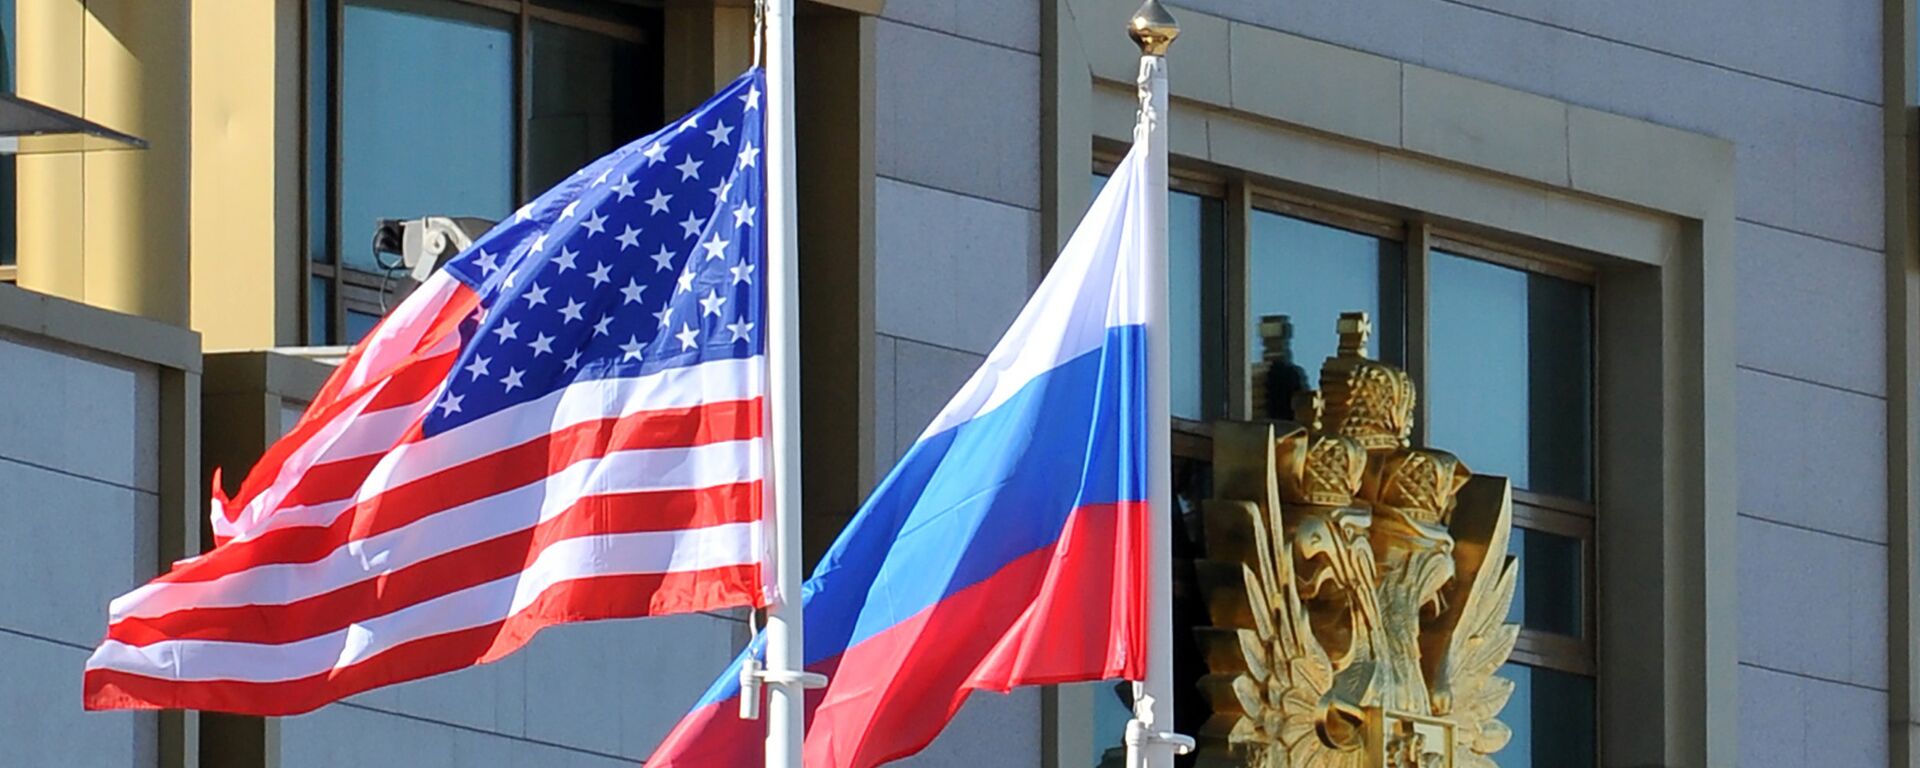 This photo taken on May 7, 2013 shows Russian and the US flags running up as the US Secretary of State arrives at Moscow Vnukovo Airport - Sputnik International, 1920, 15.06.2021